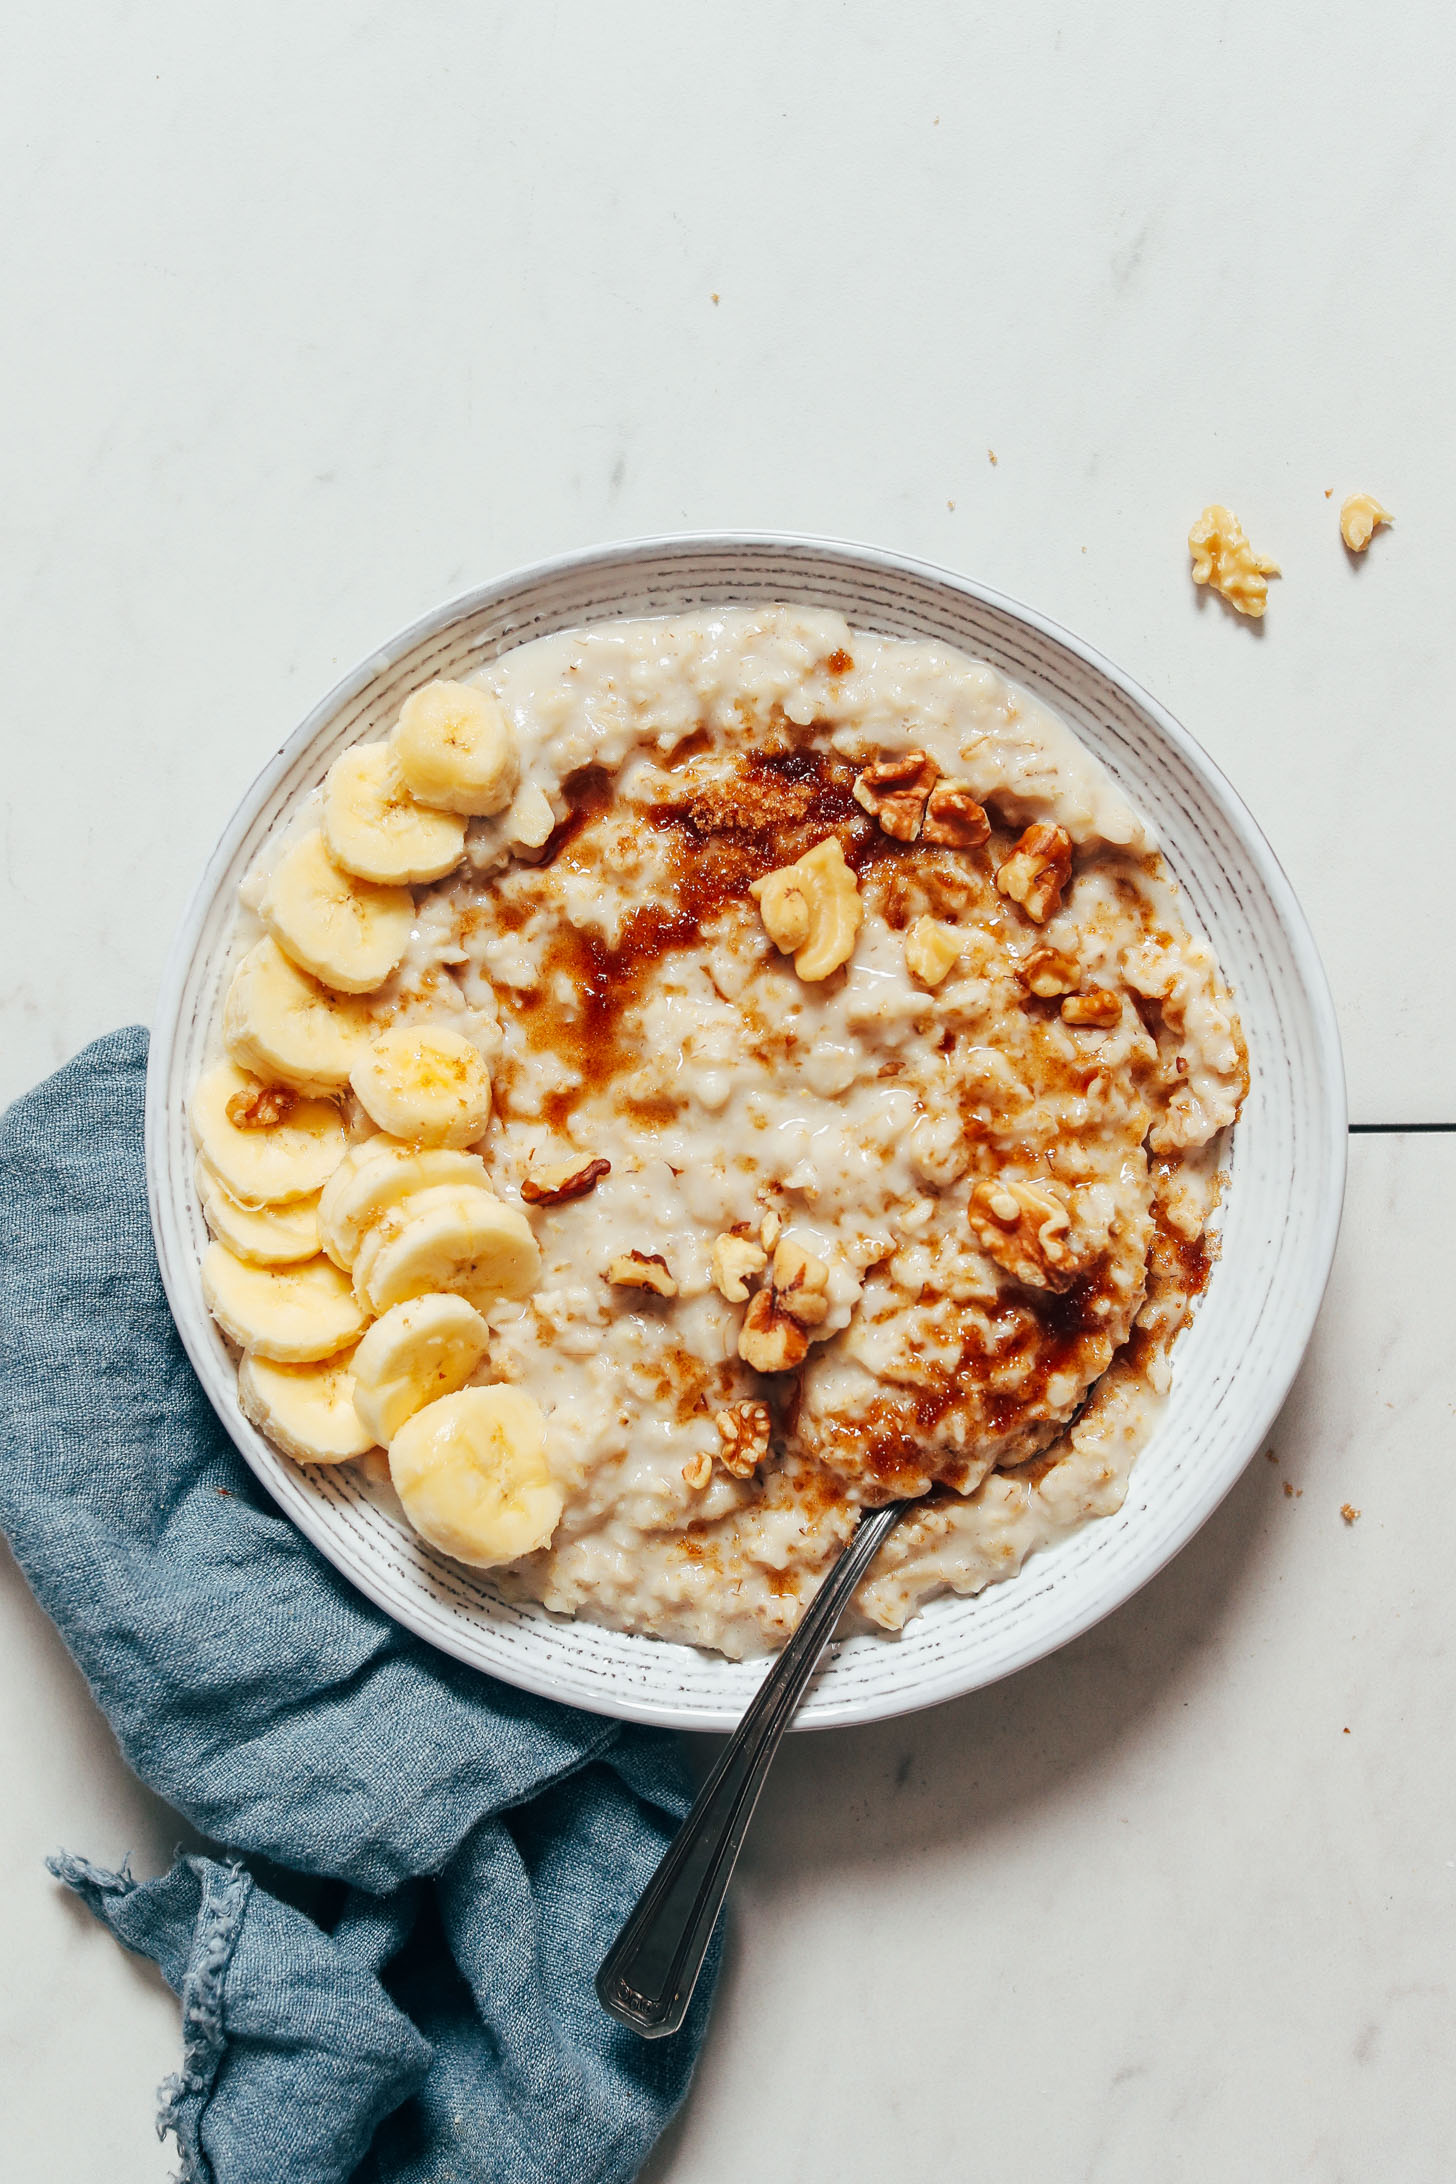 Bowl of creamy oats topped with brown sugar, walnuts, and banana